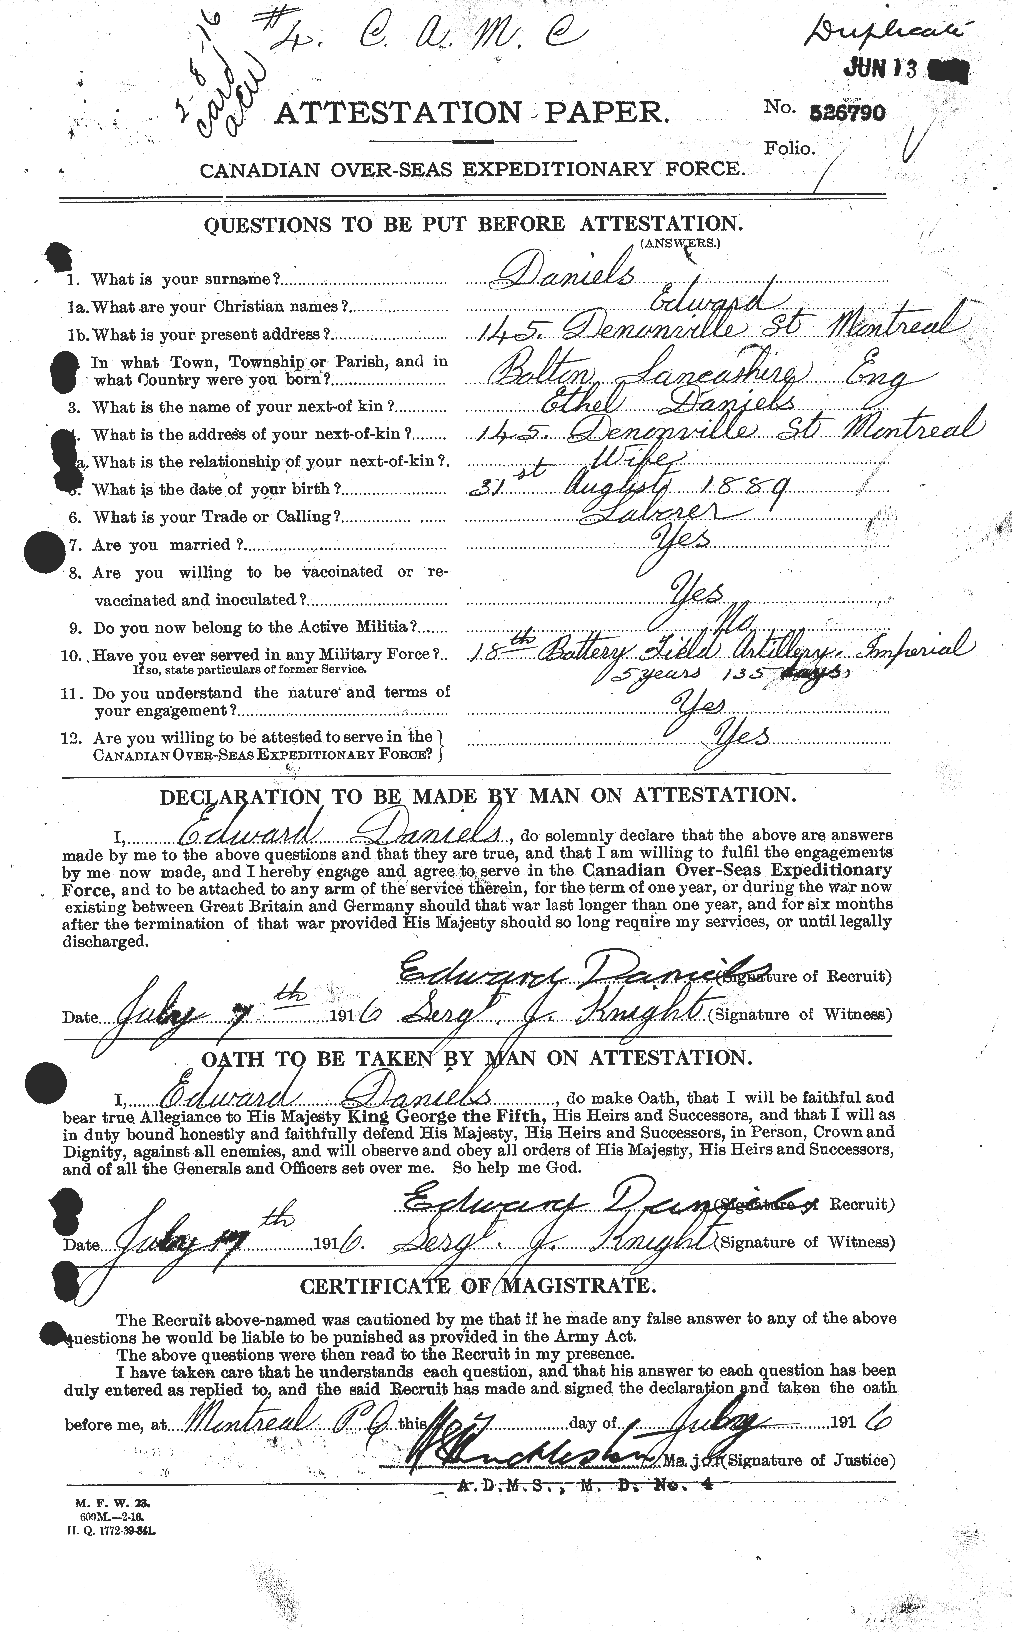 Personnel Records of the First World War - CEF 279582a